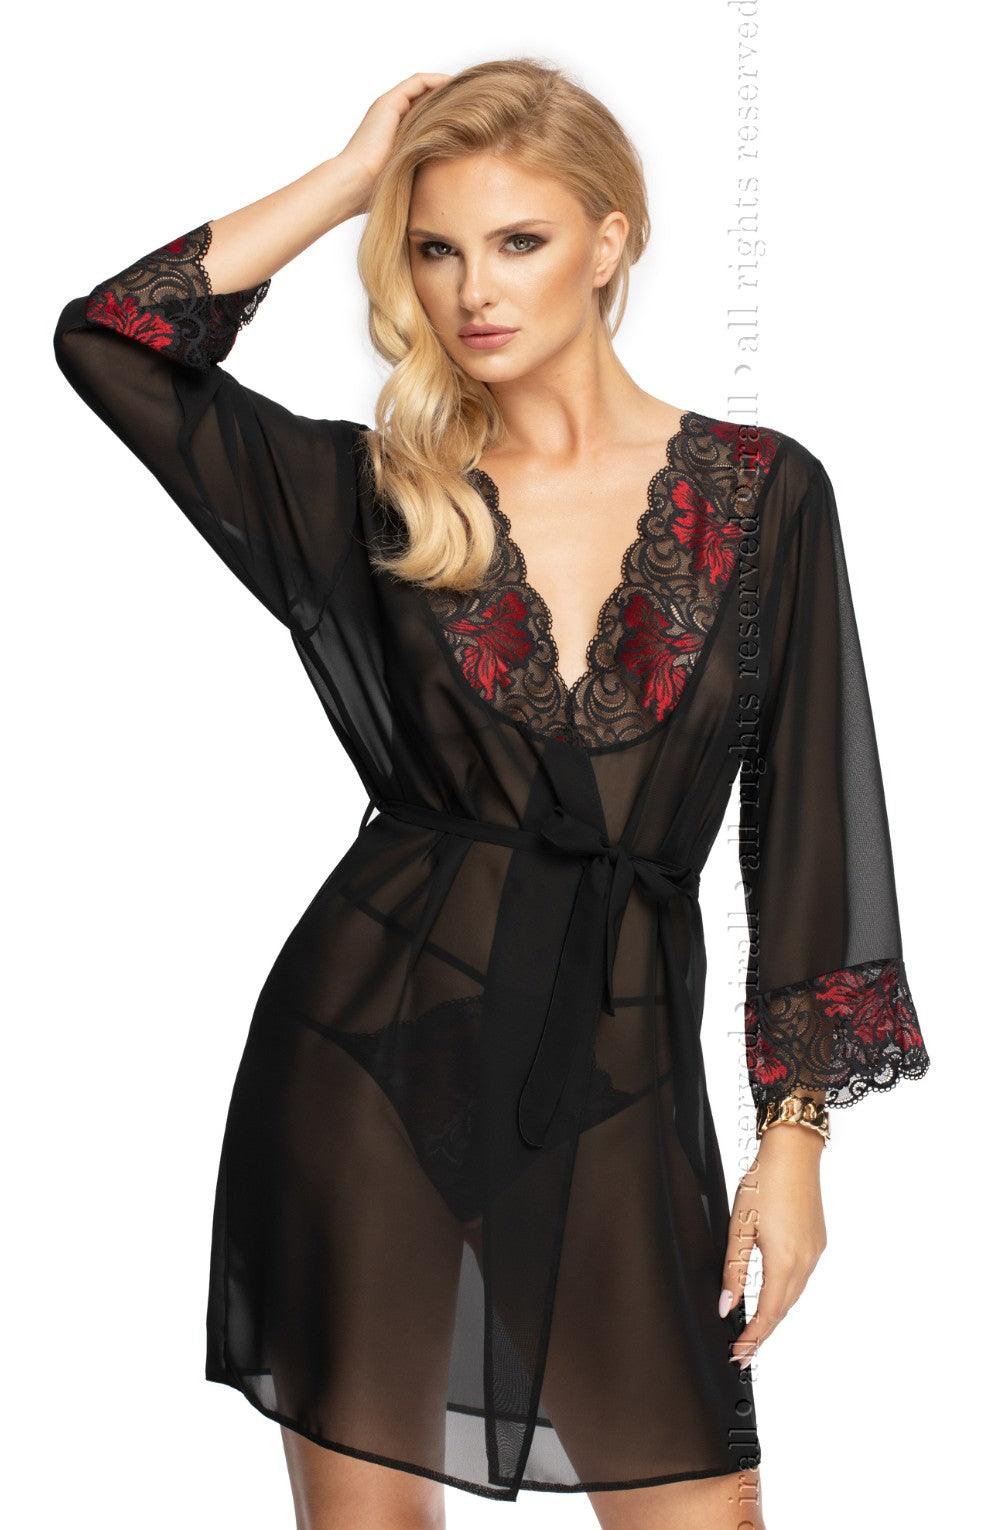 Irall Erotic Oriana Gown Black - Sydney Rose Lingerie 